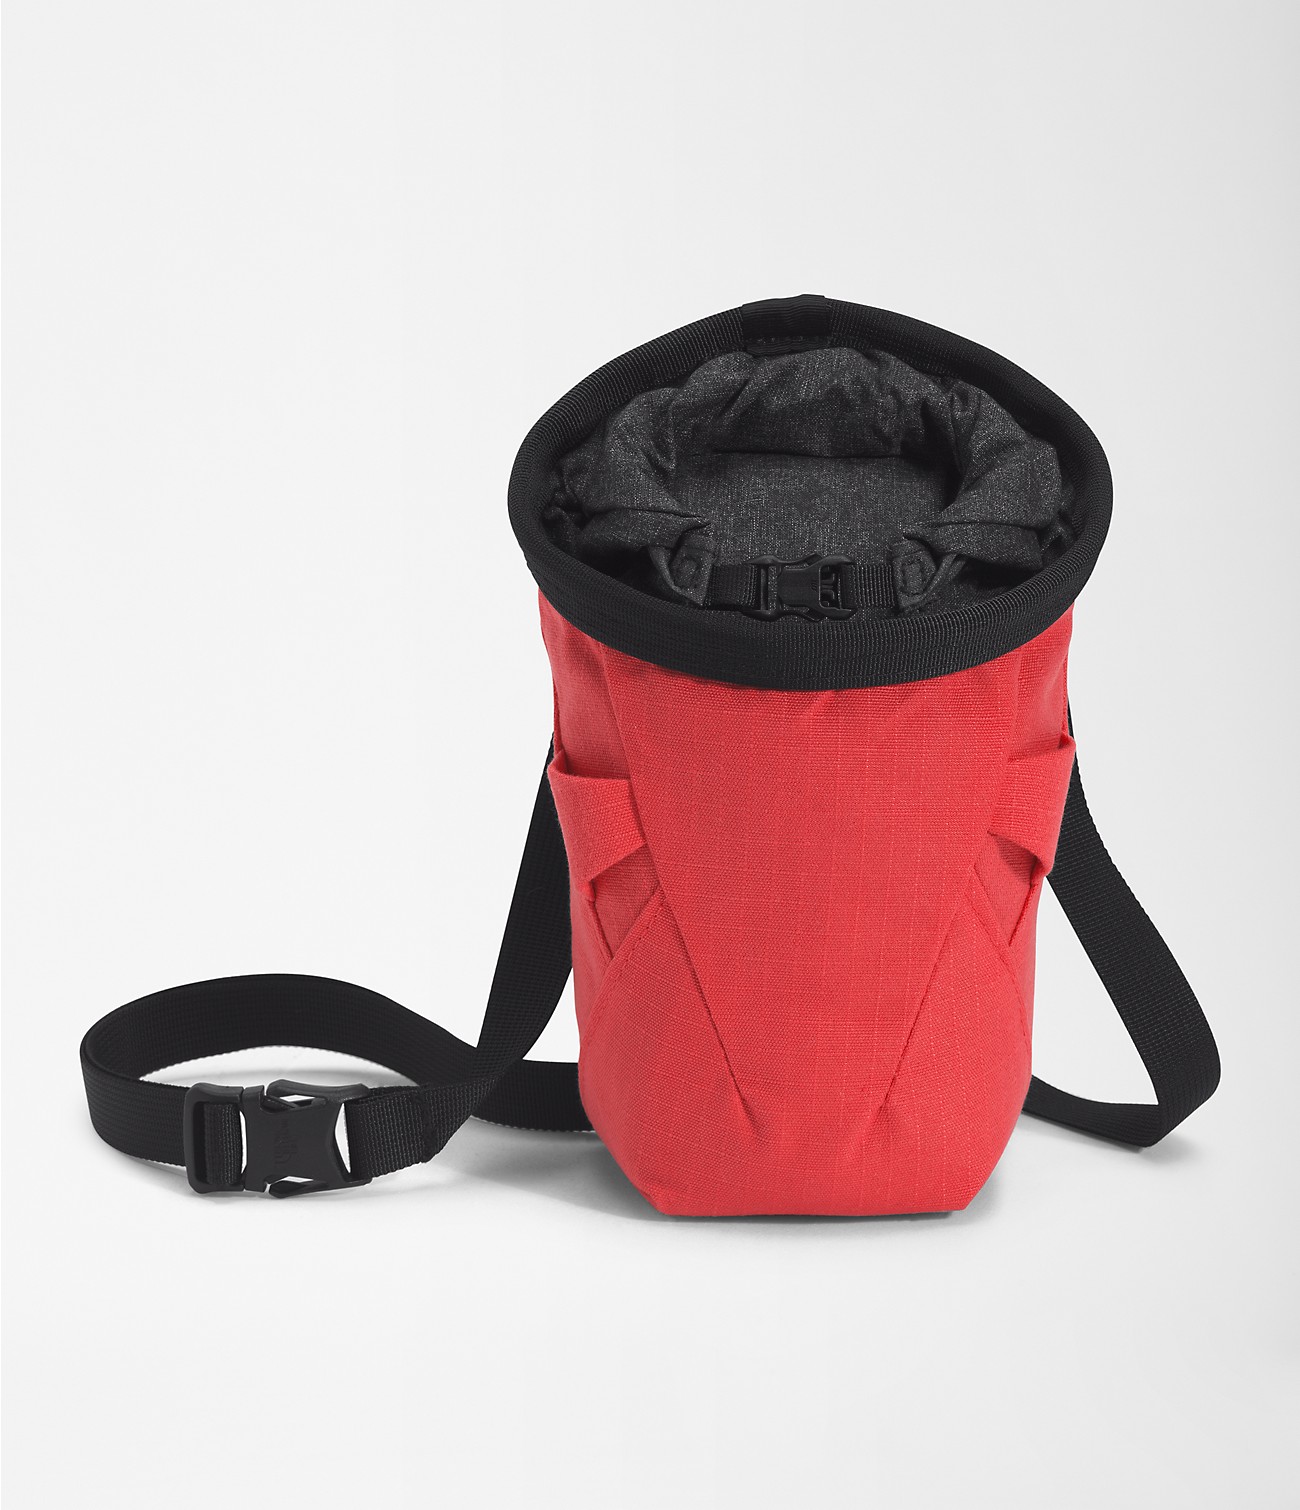 North Dome Chalk Bag | The North Face